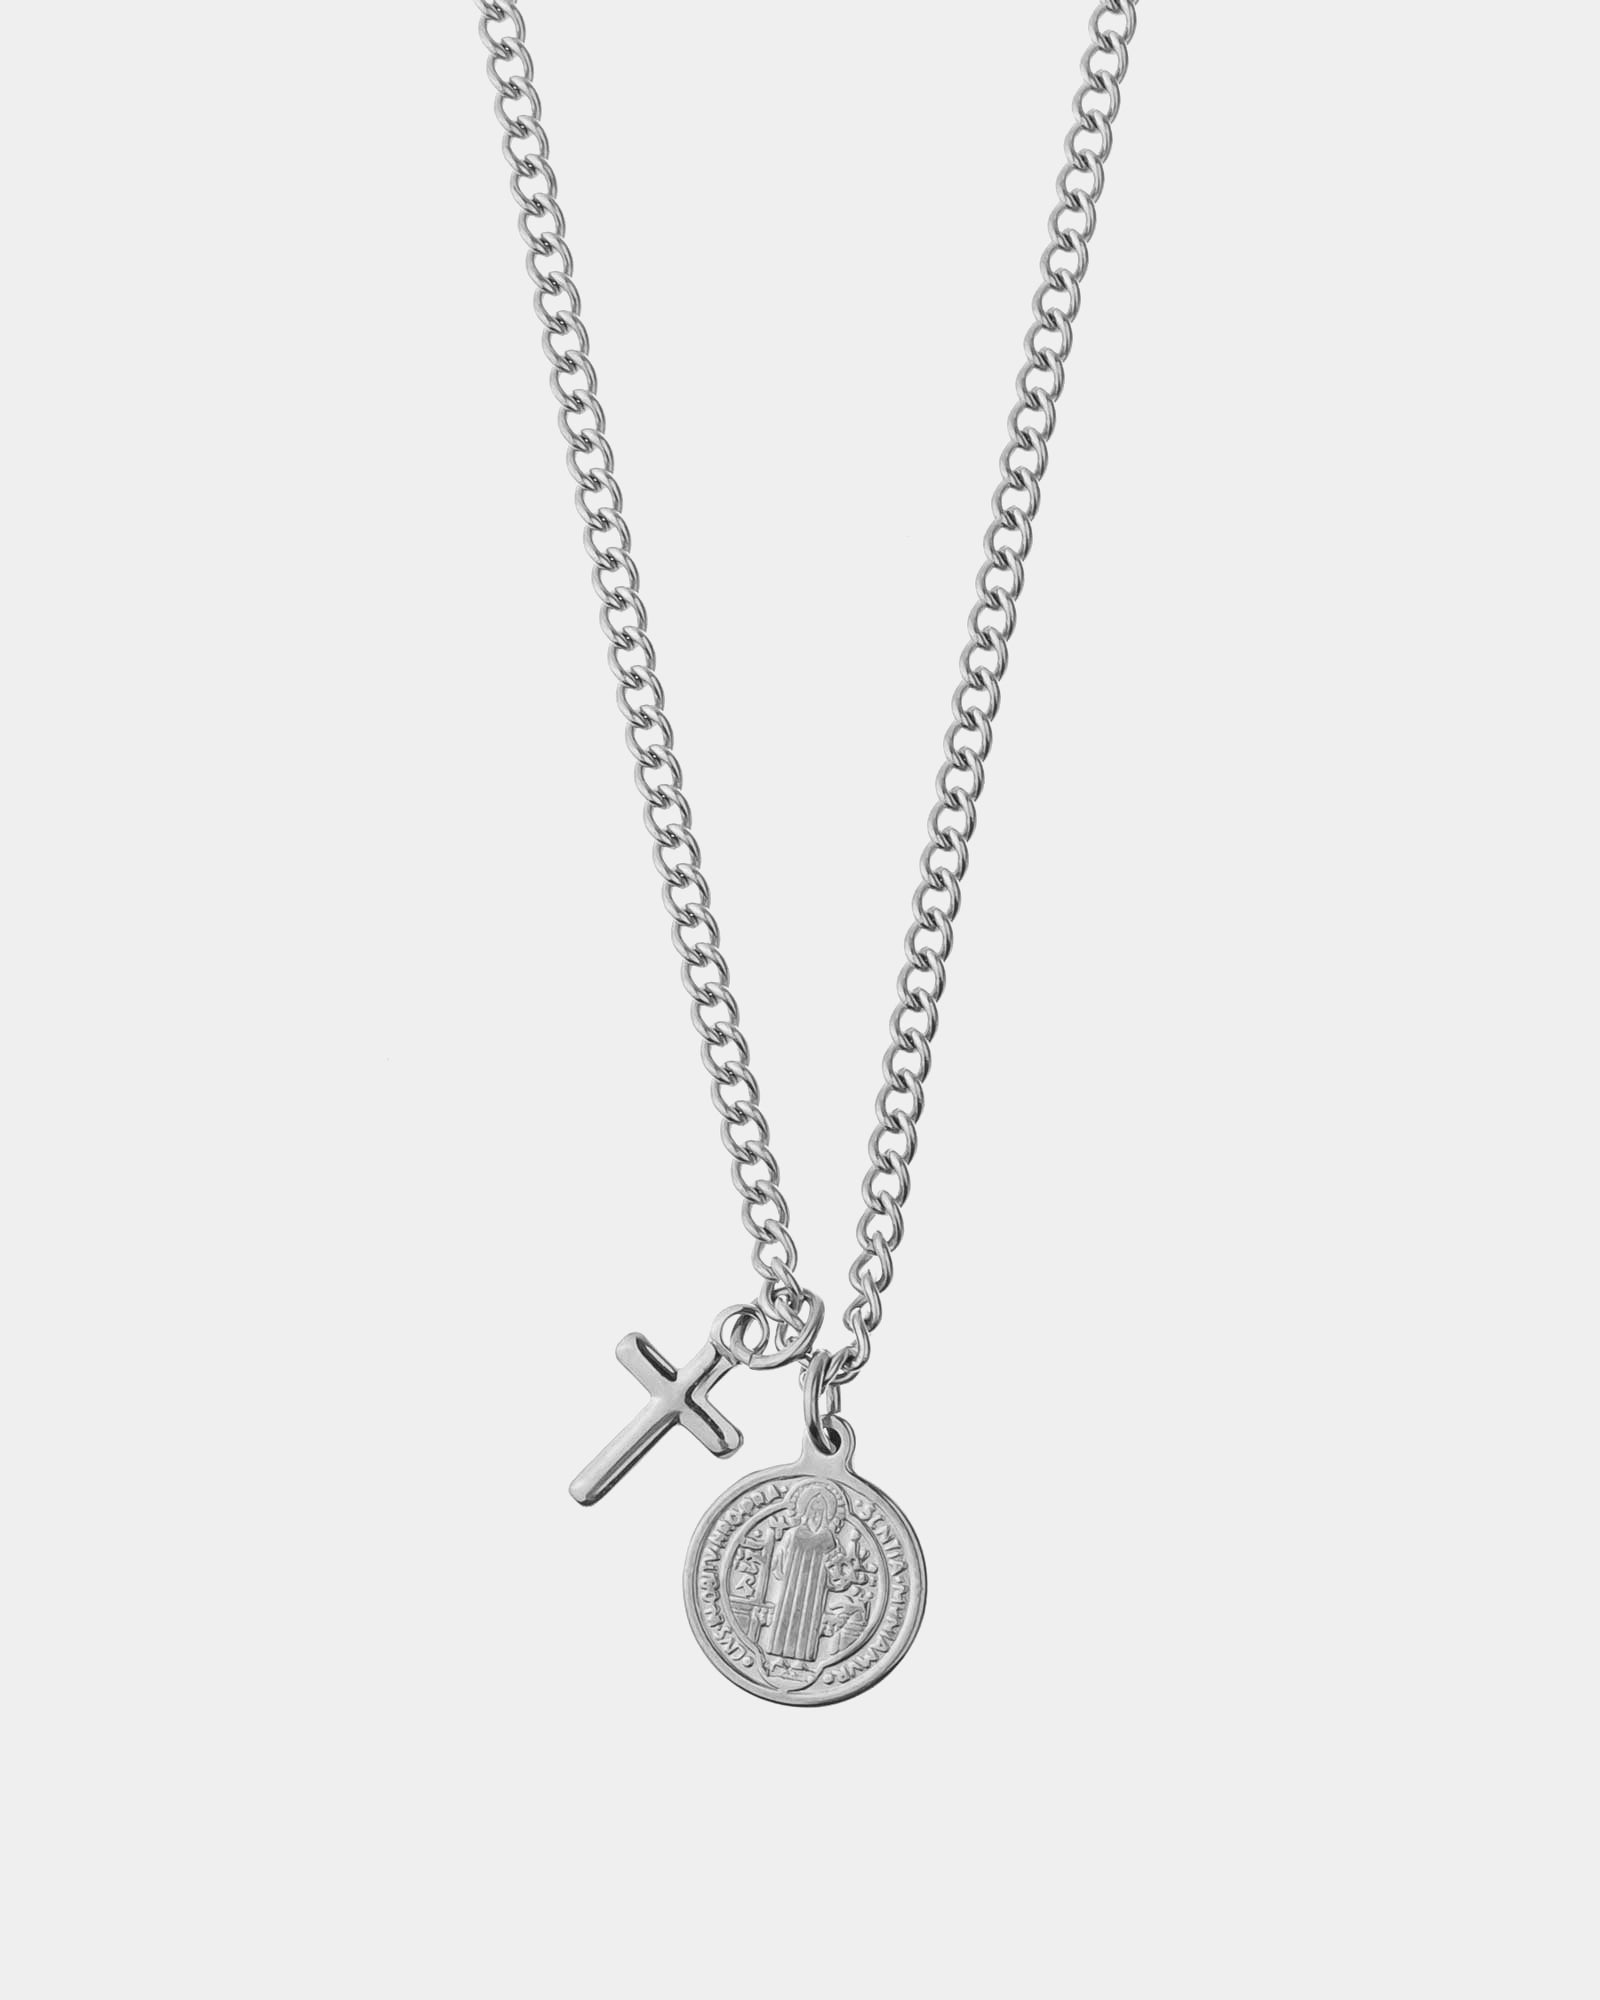 Mykonos Thin - Stainless Steel Silver Necklace 'Mykonos Thin' - Pendant Necklaces - Online Unissex Jewelry - Dicci